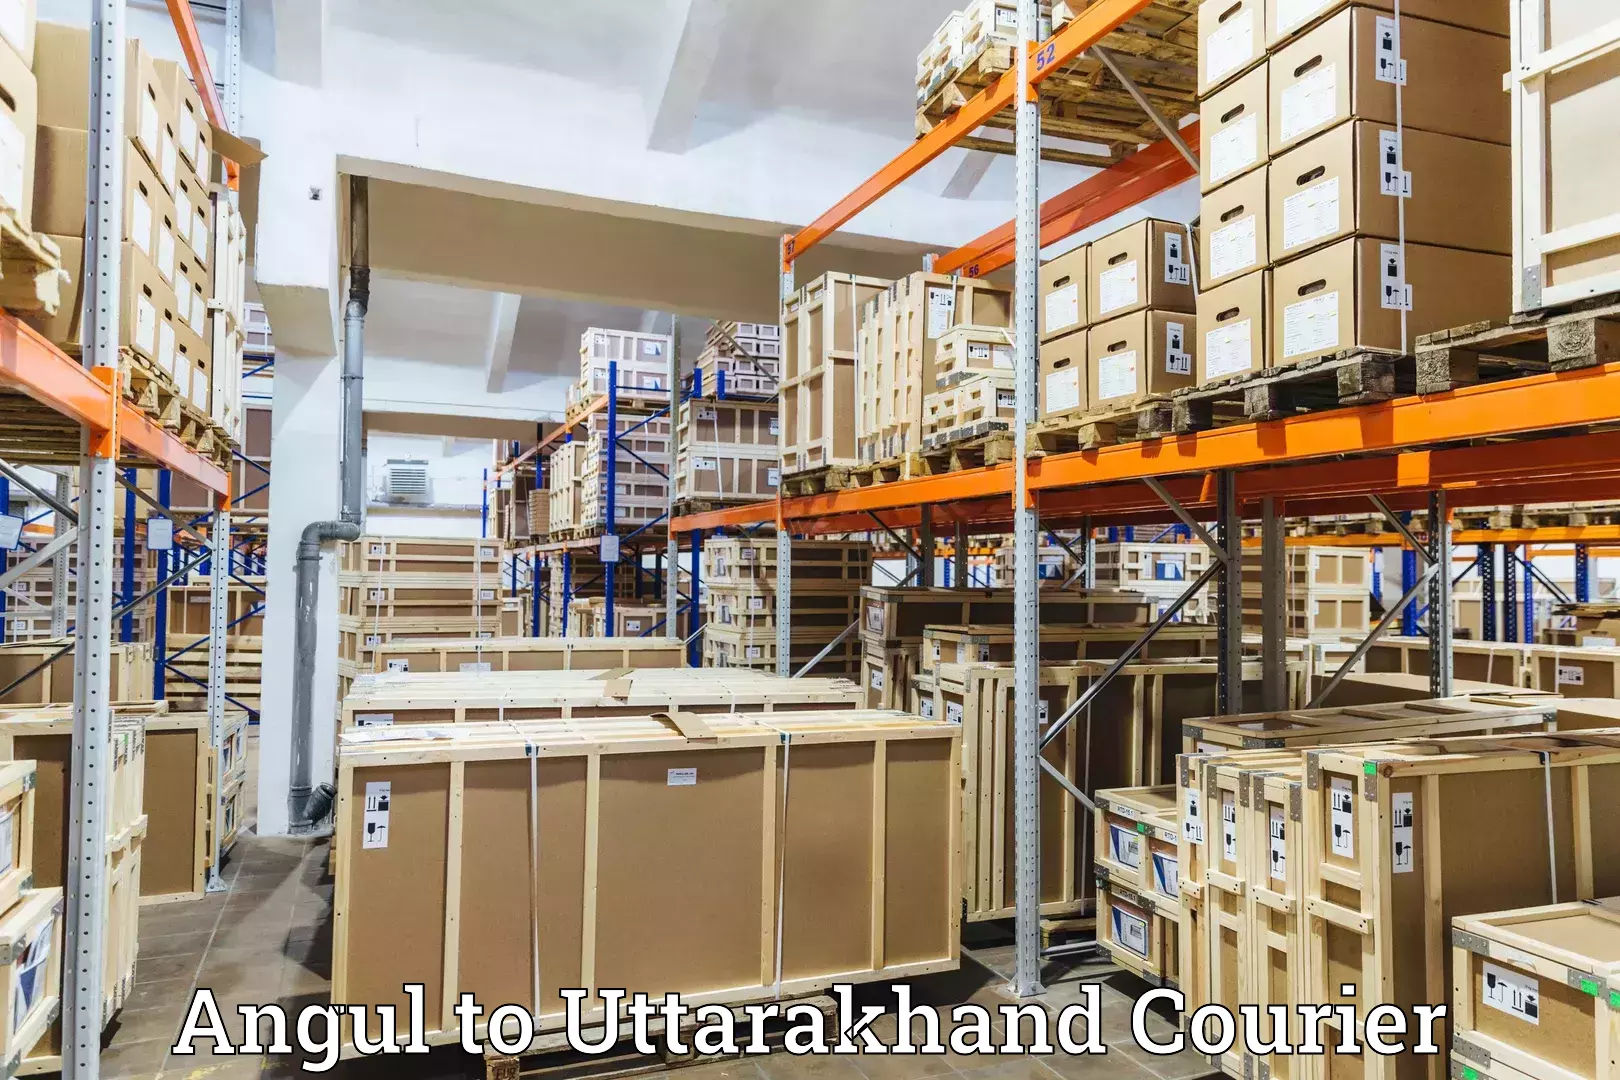 State-of-the-art courier technology Angul to Nainital